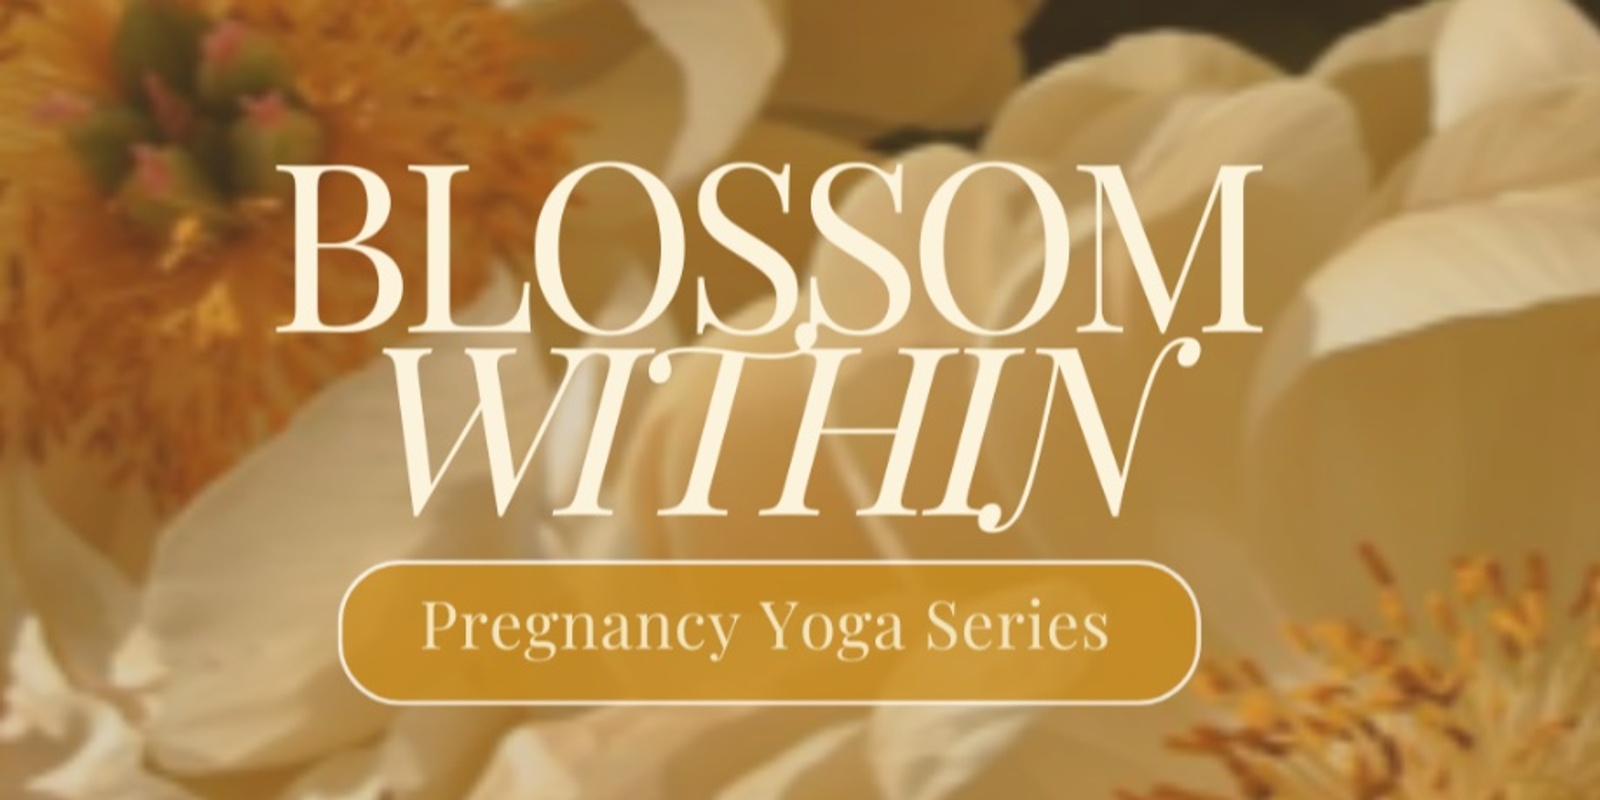 Banner image for Blossom Within - Pregnancy Yoga Series